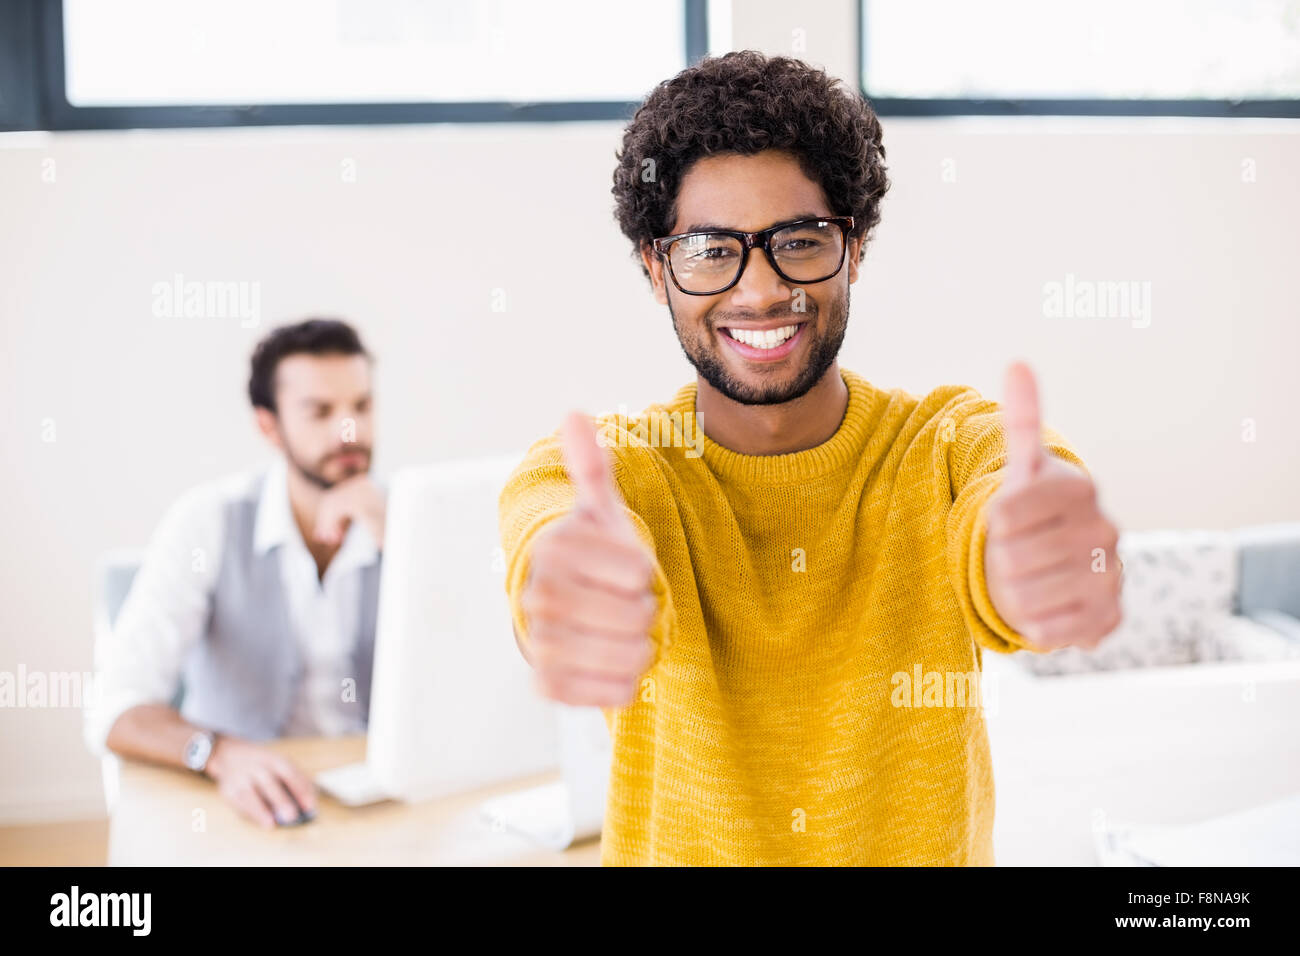 Smiling man showing thumbs up Stock Photo